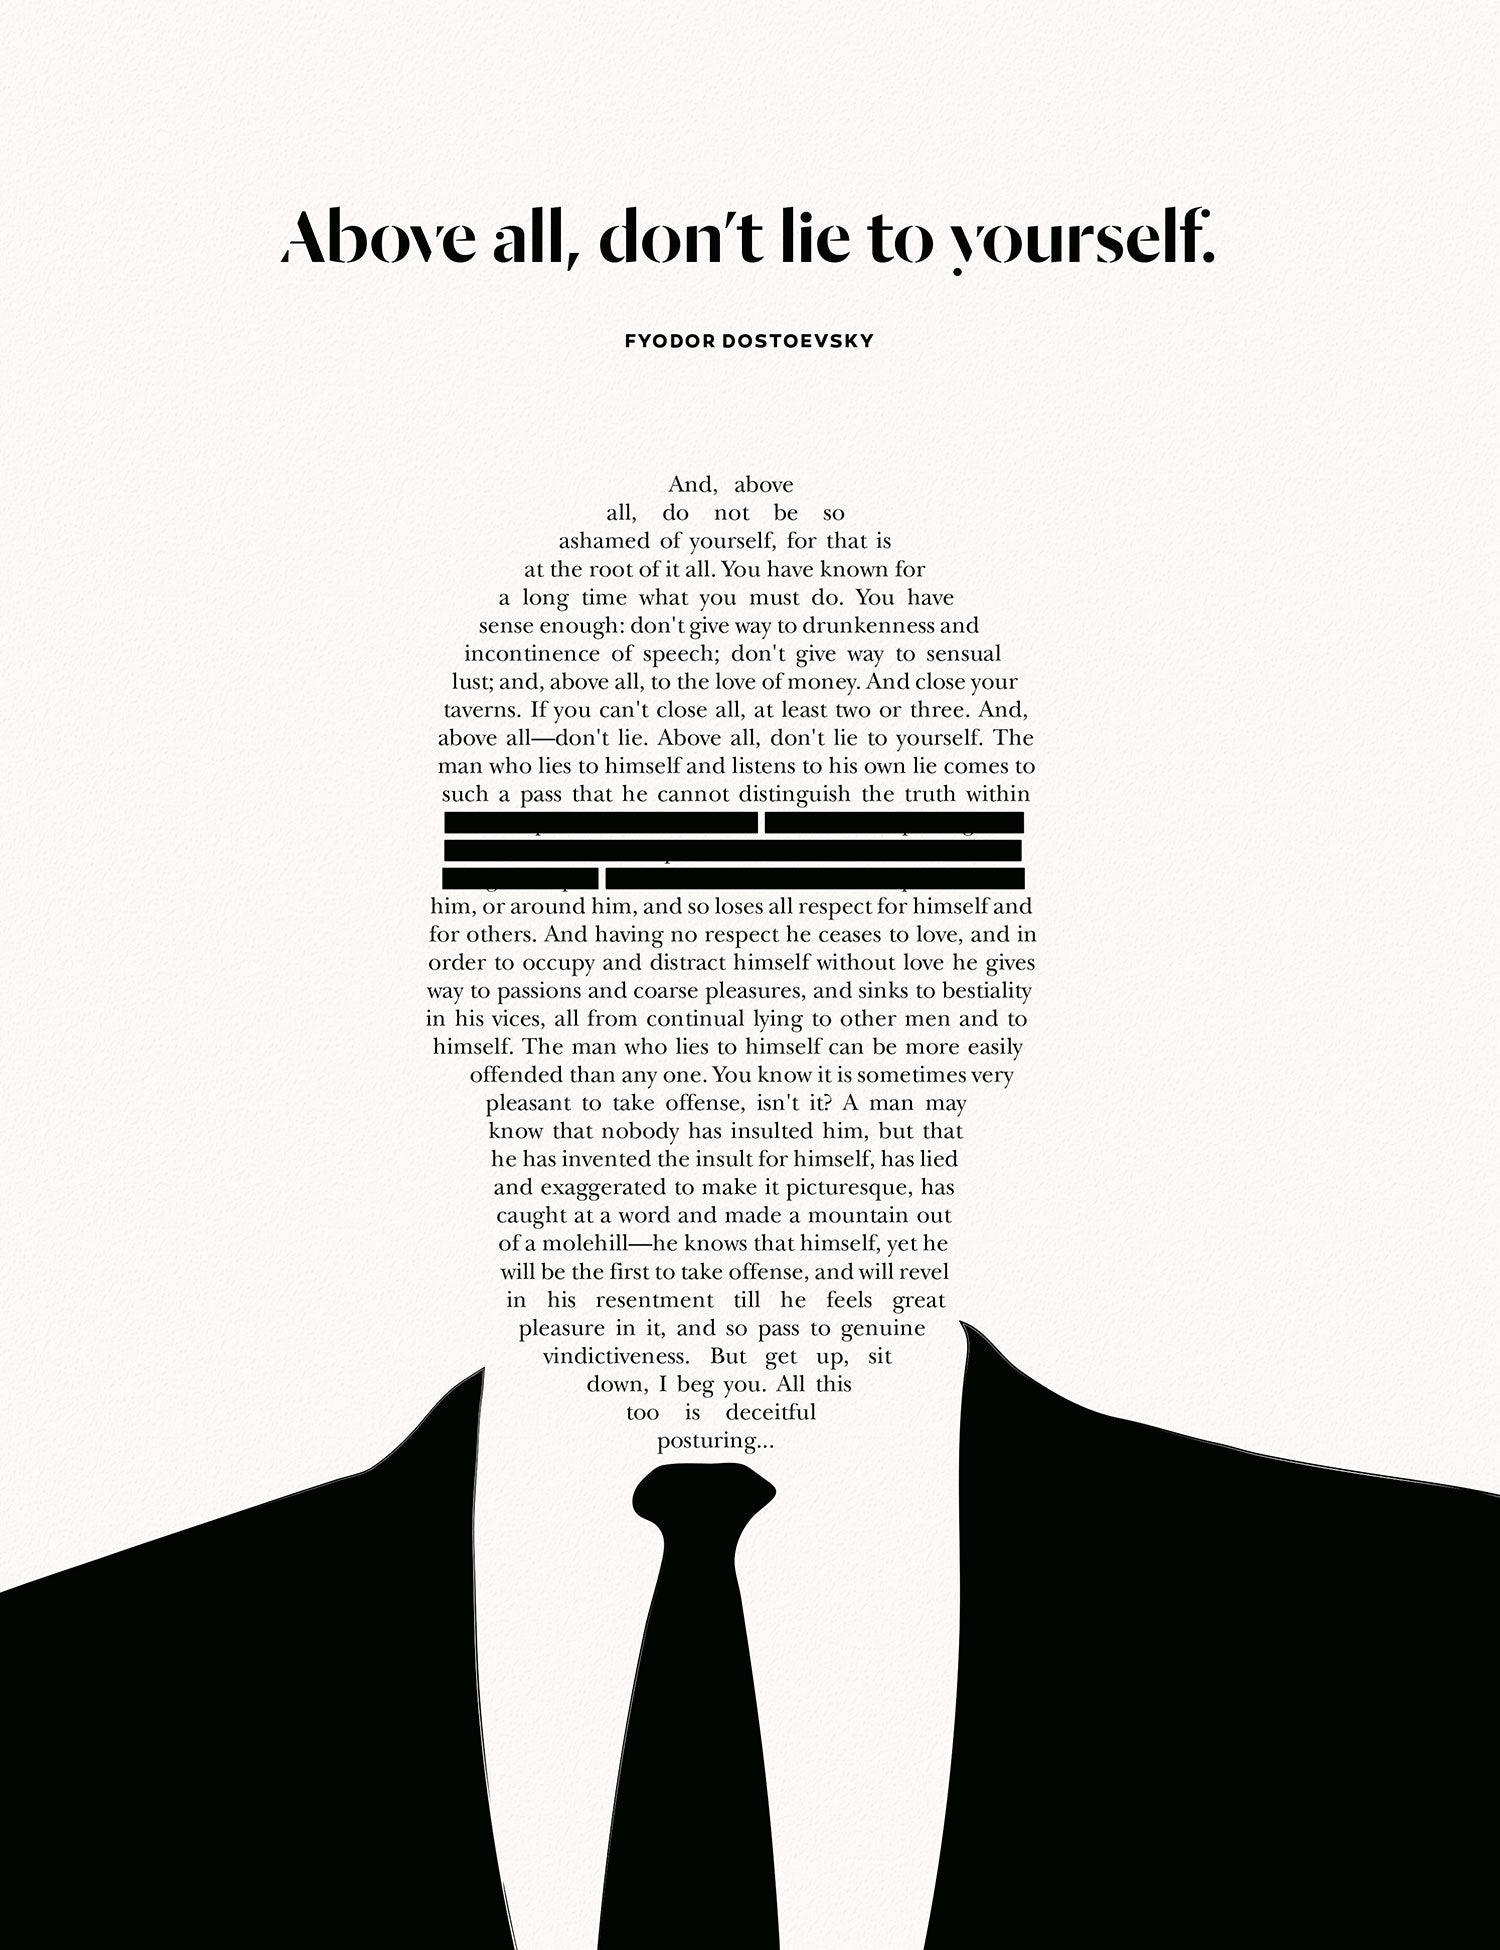 Dostoevsky don't lie to yourself illustration by Evan Robertson